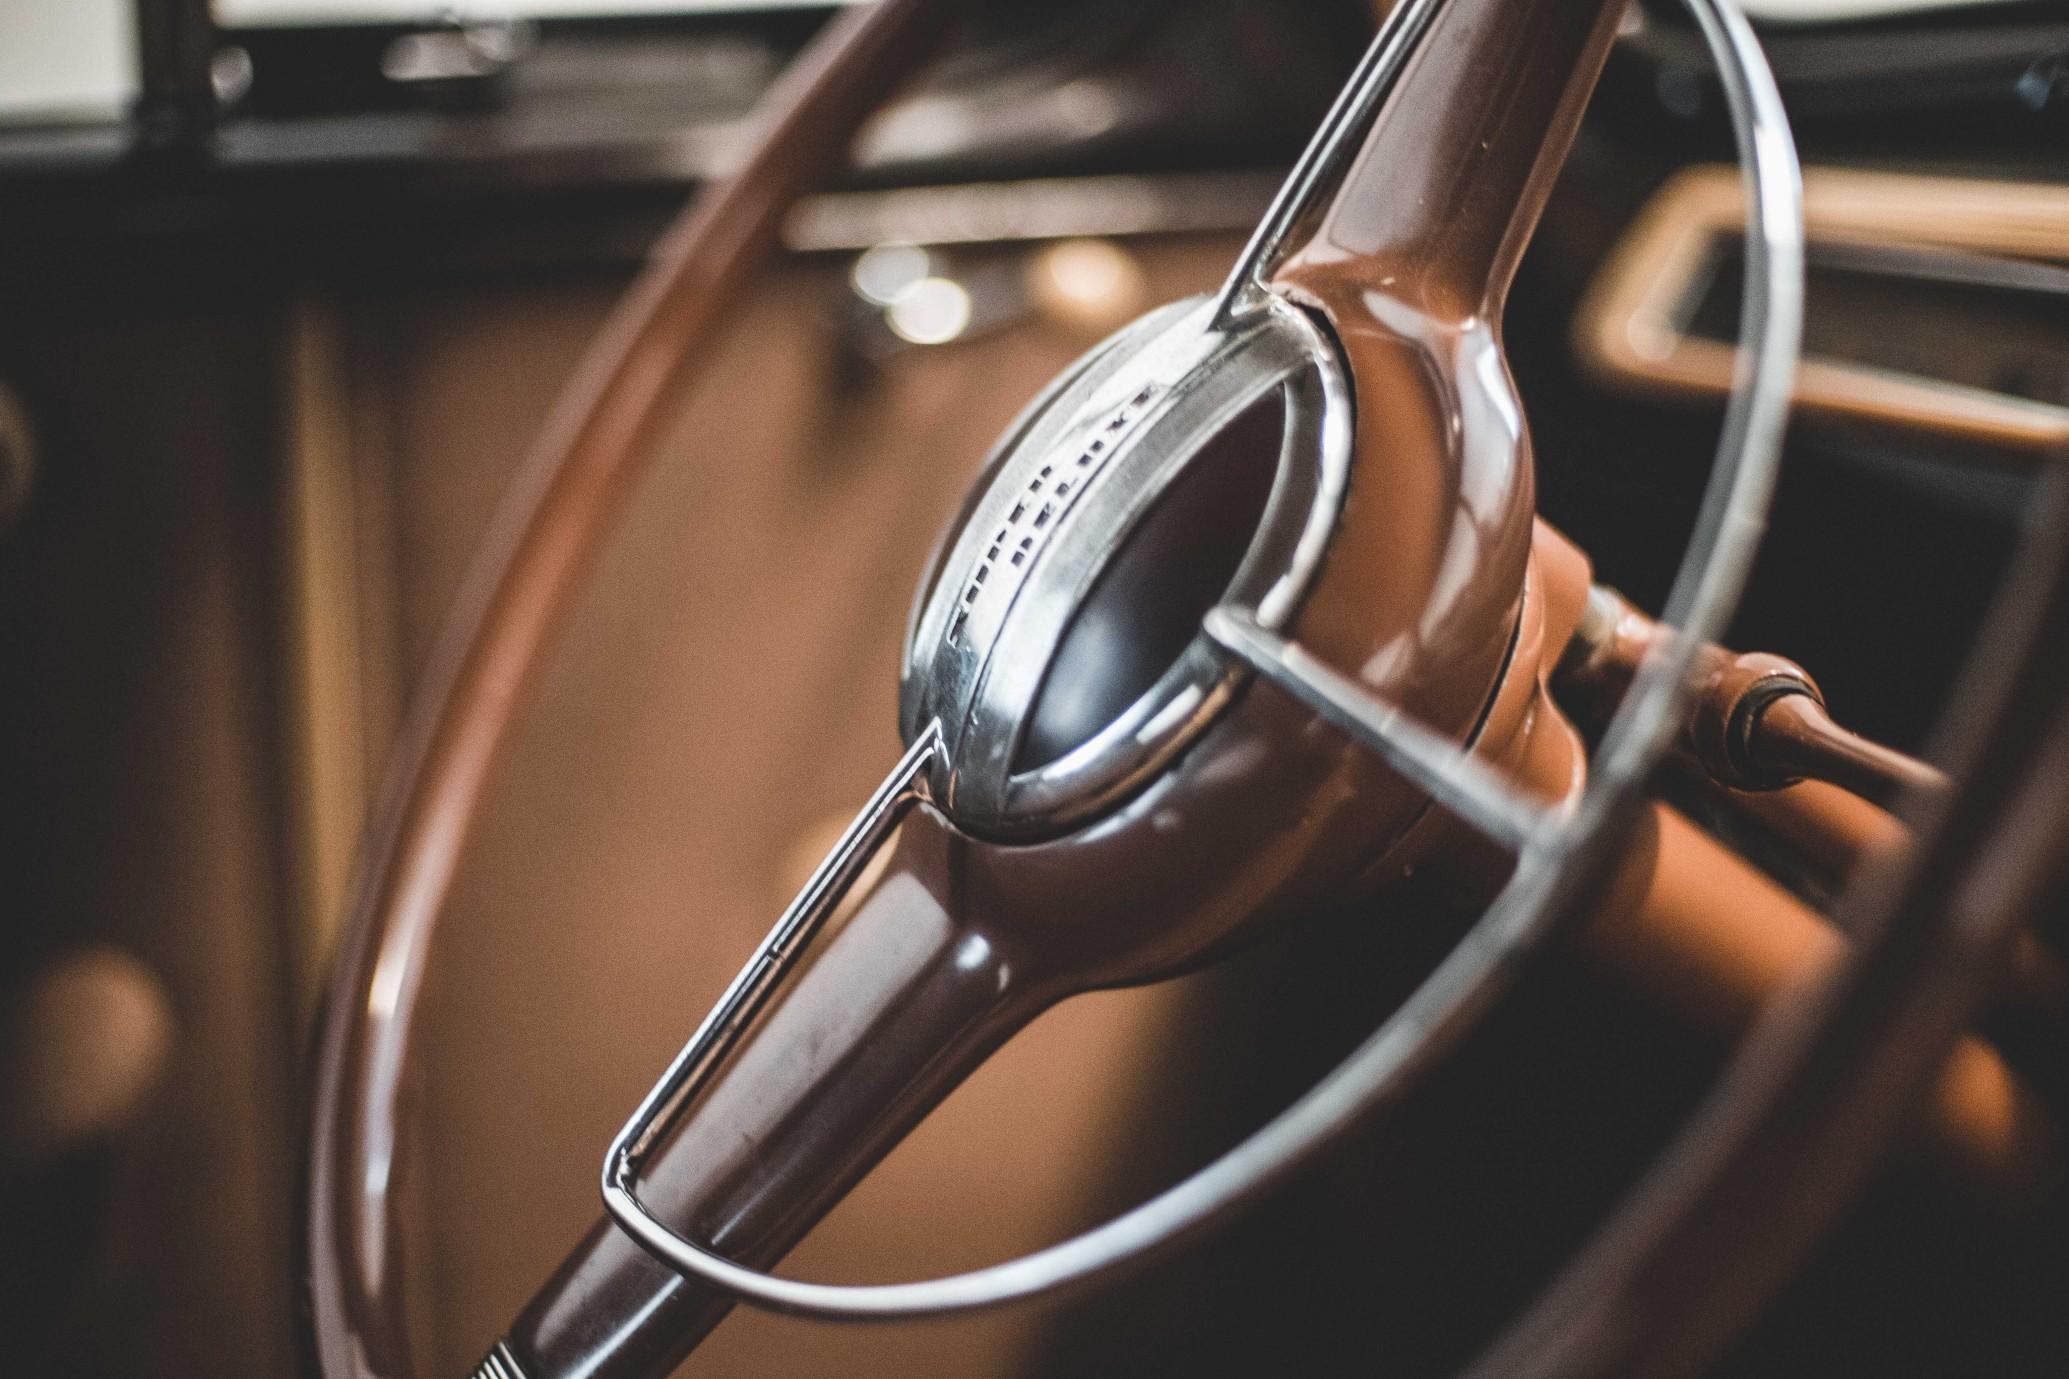 A close-up shot of the steering wheel on a classic car.